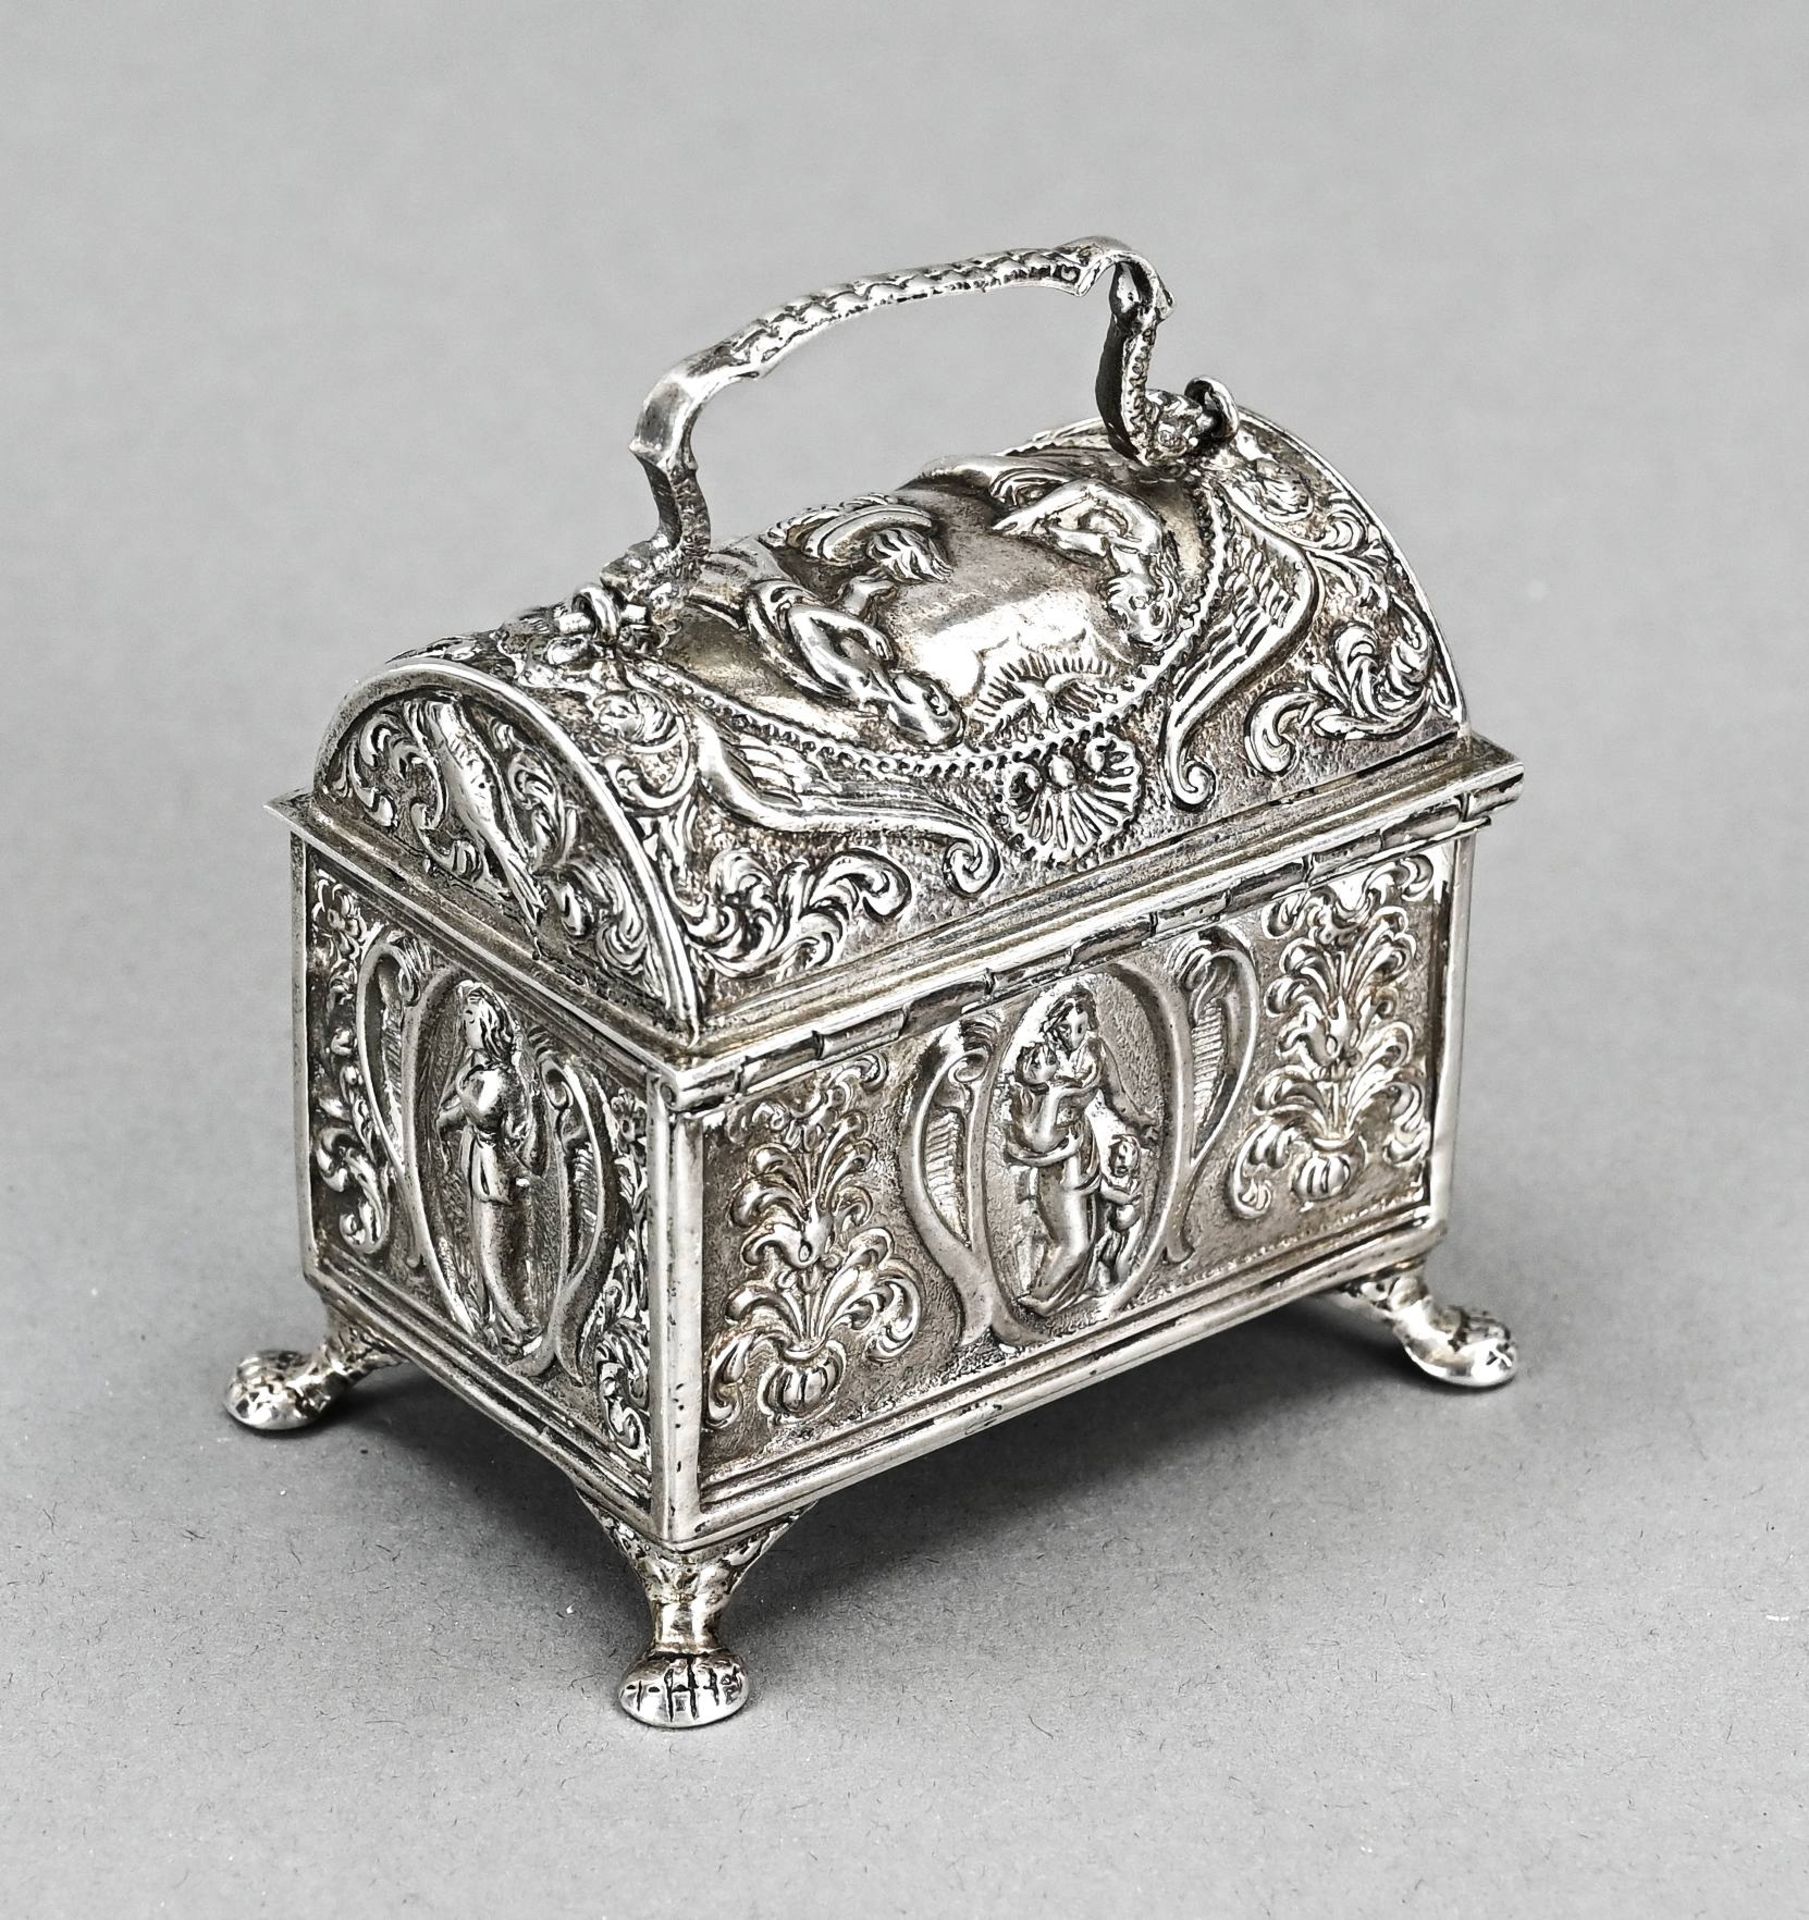 Silver knot box - Image 2 of 2